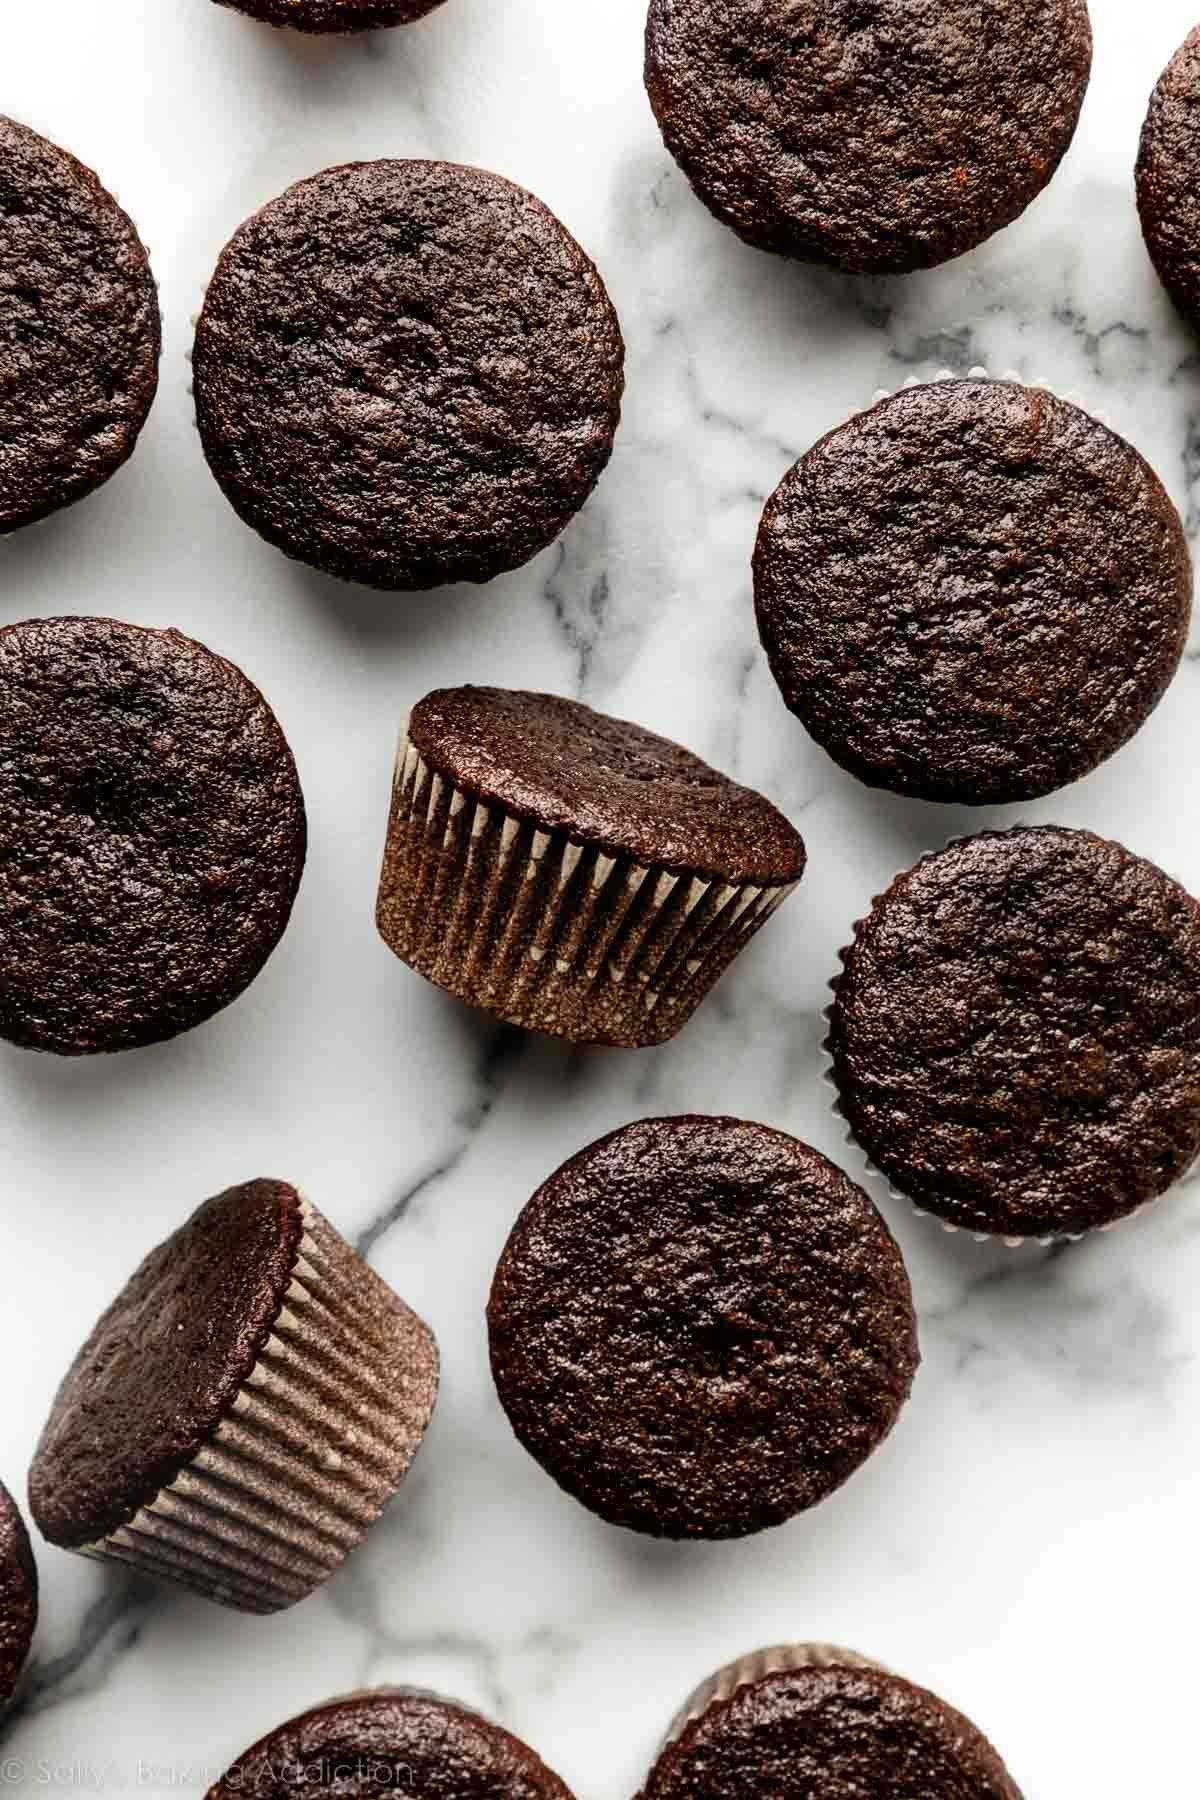 plain unfrosted chocolate cupcakes on marble counter.